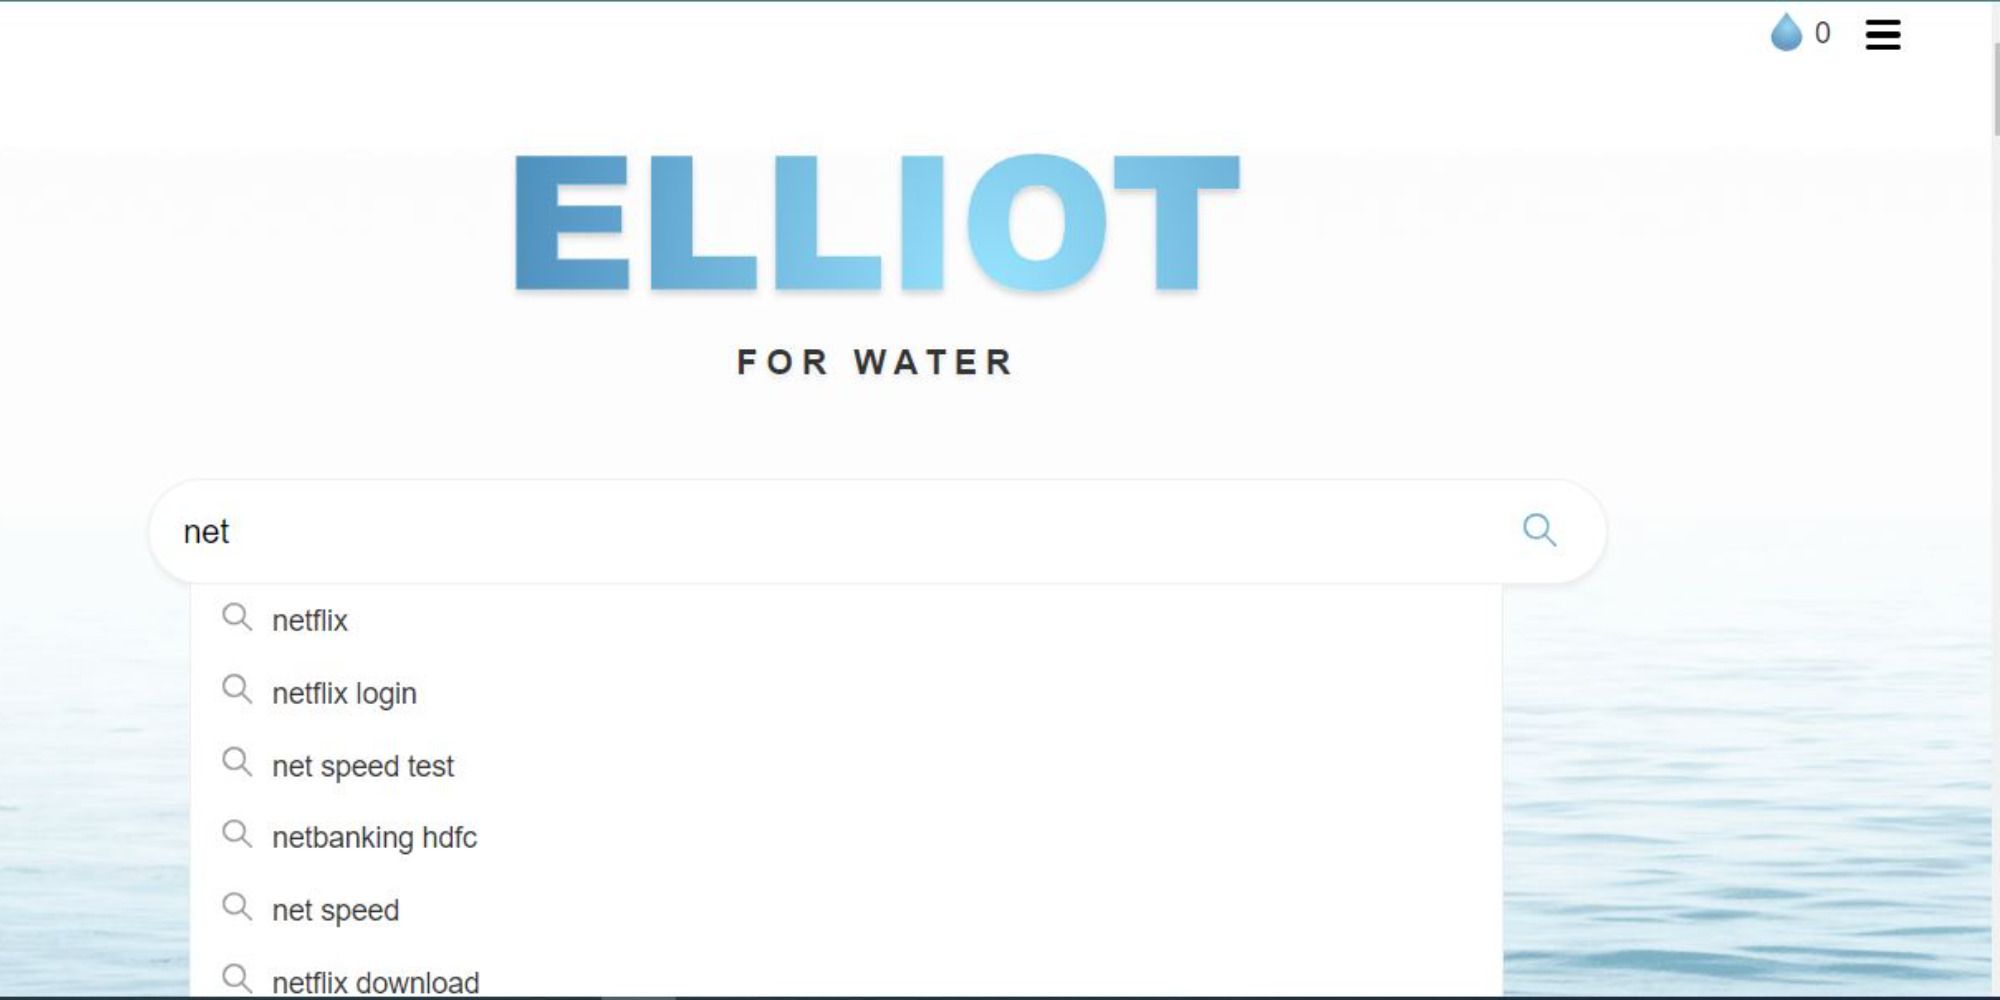 Search results in Elliot For Water search engine